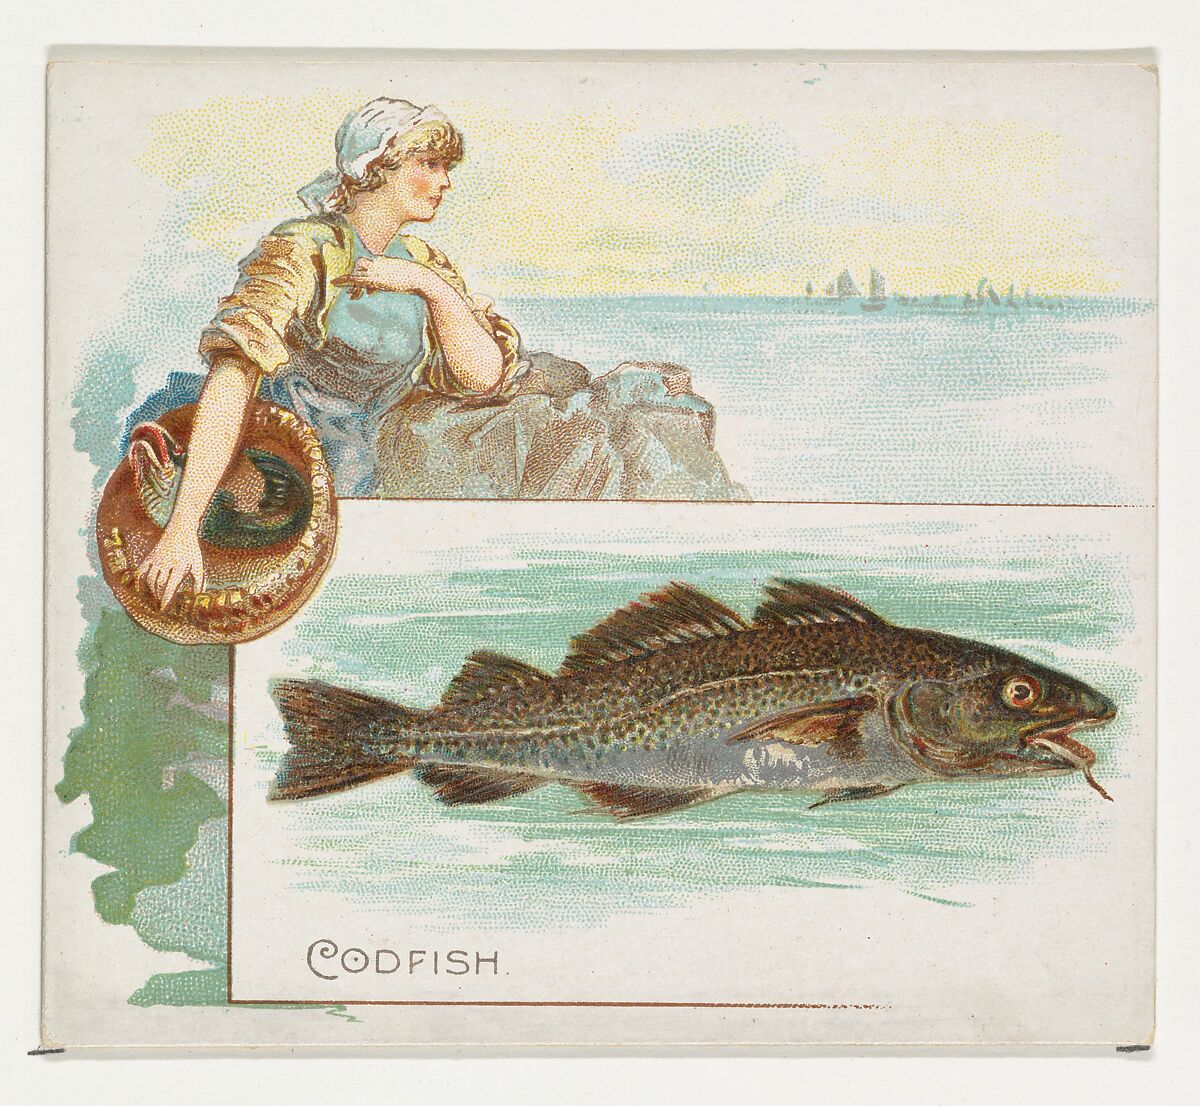 Codfish, from Fish from American Waters series (N39) for Allen & Ginter Cigarettes, Issued by Allen &amp; Ginter (American, Richmond, Virginia), Commercial color lithograph 